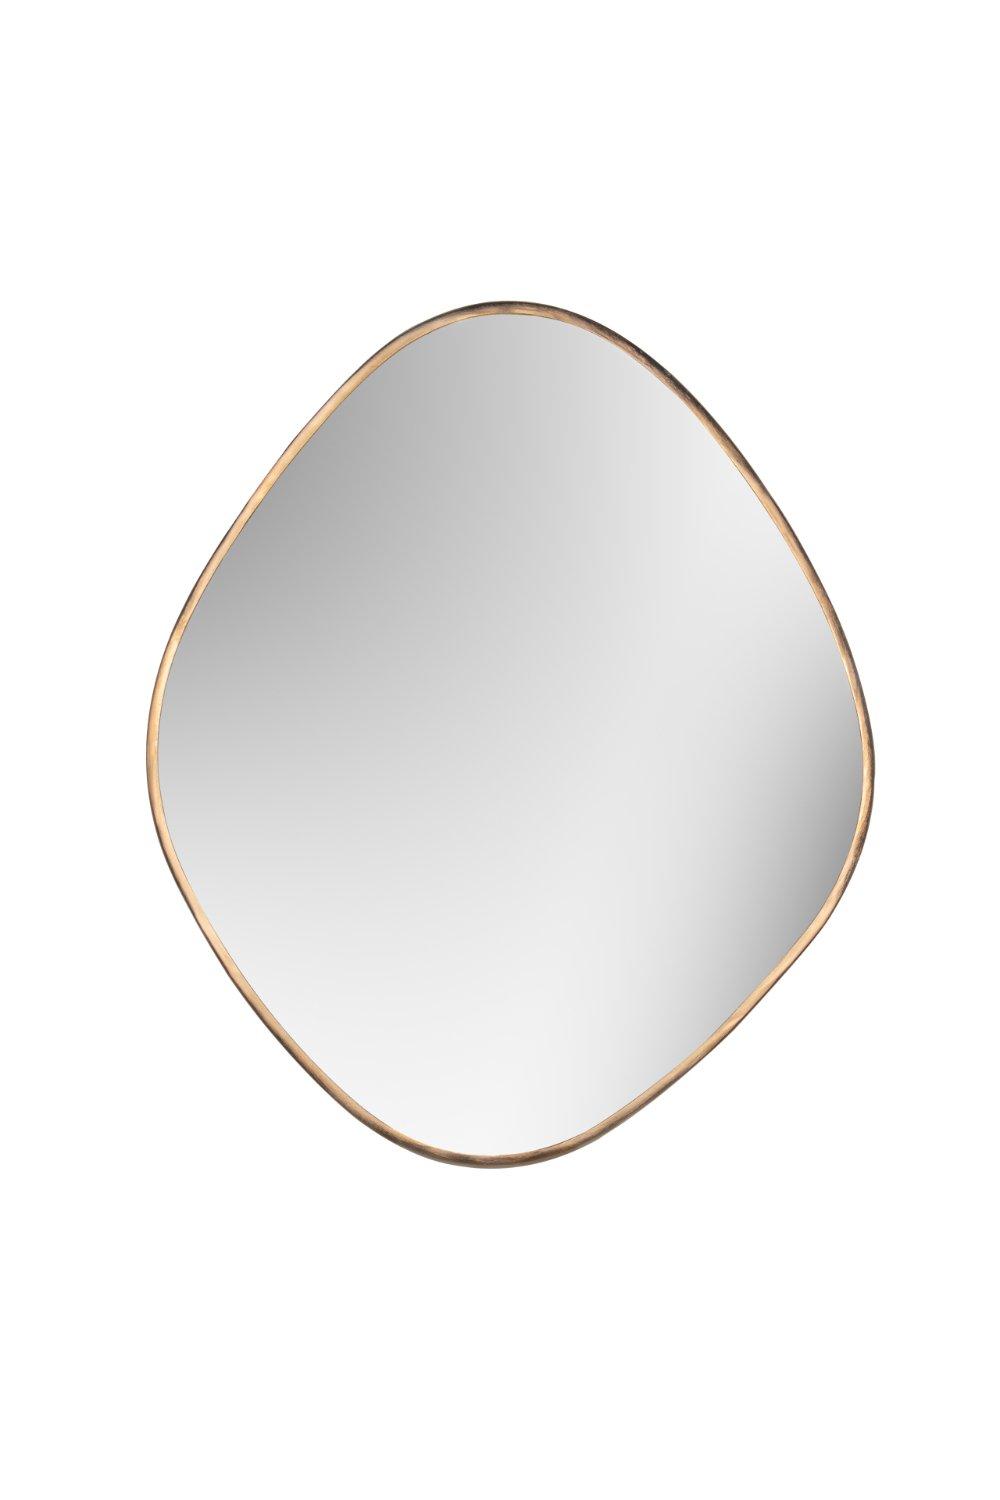 Brushed Copper Organic Shaped Pebble Mirror